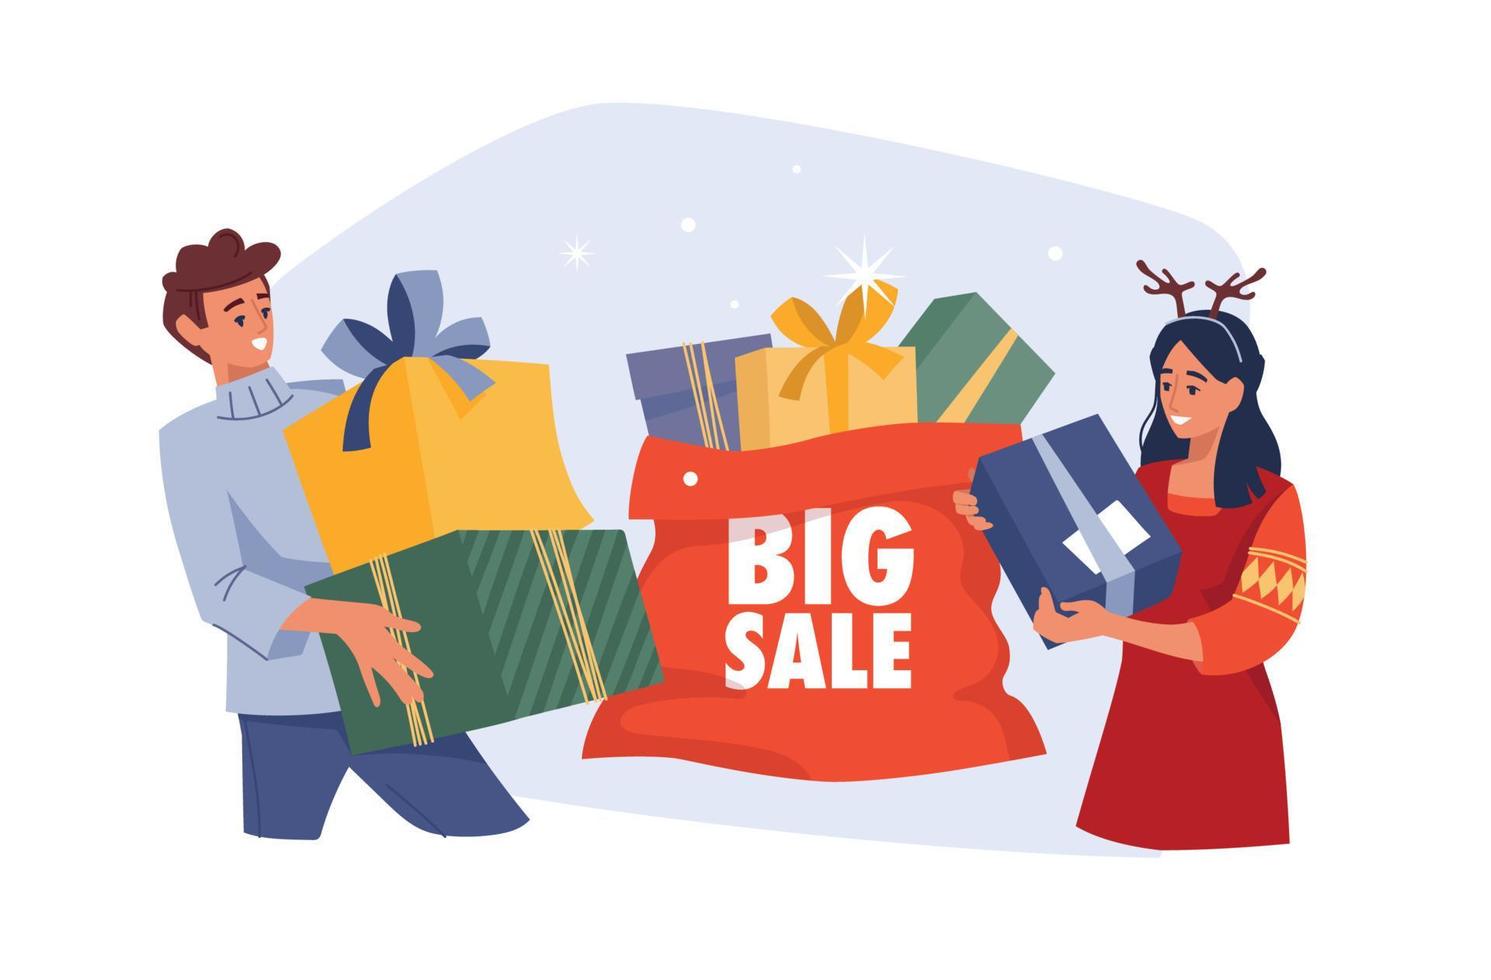 People with gifts. Girl and guy with a gift box. Christmas sale. Preparing for Christmas. Vector image.